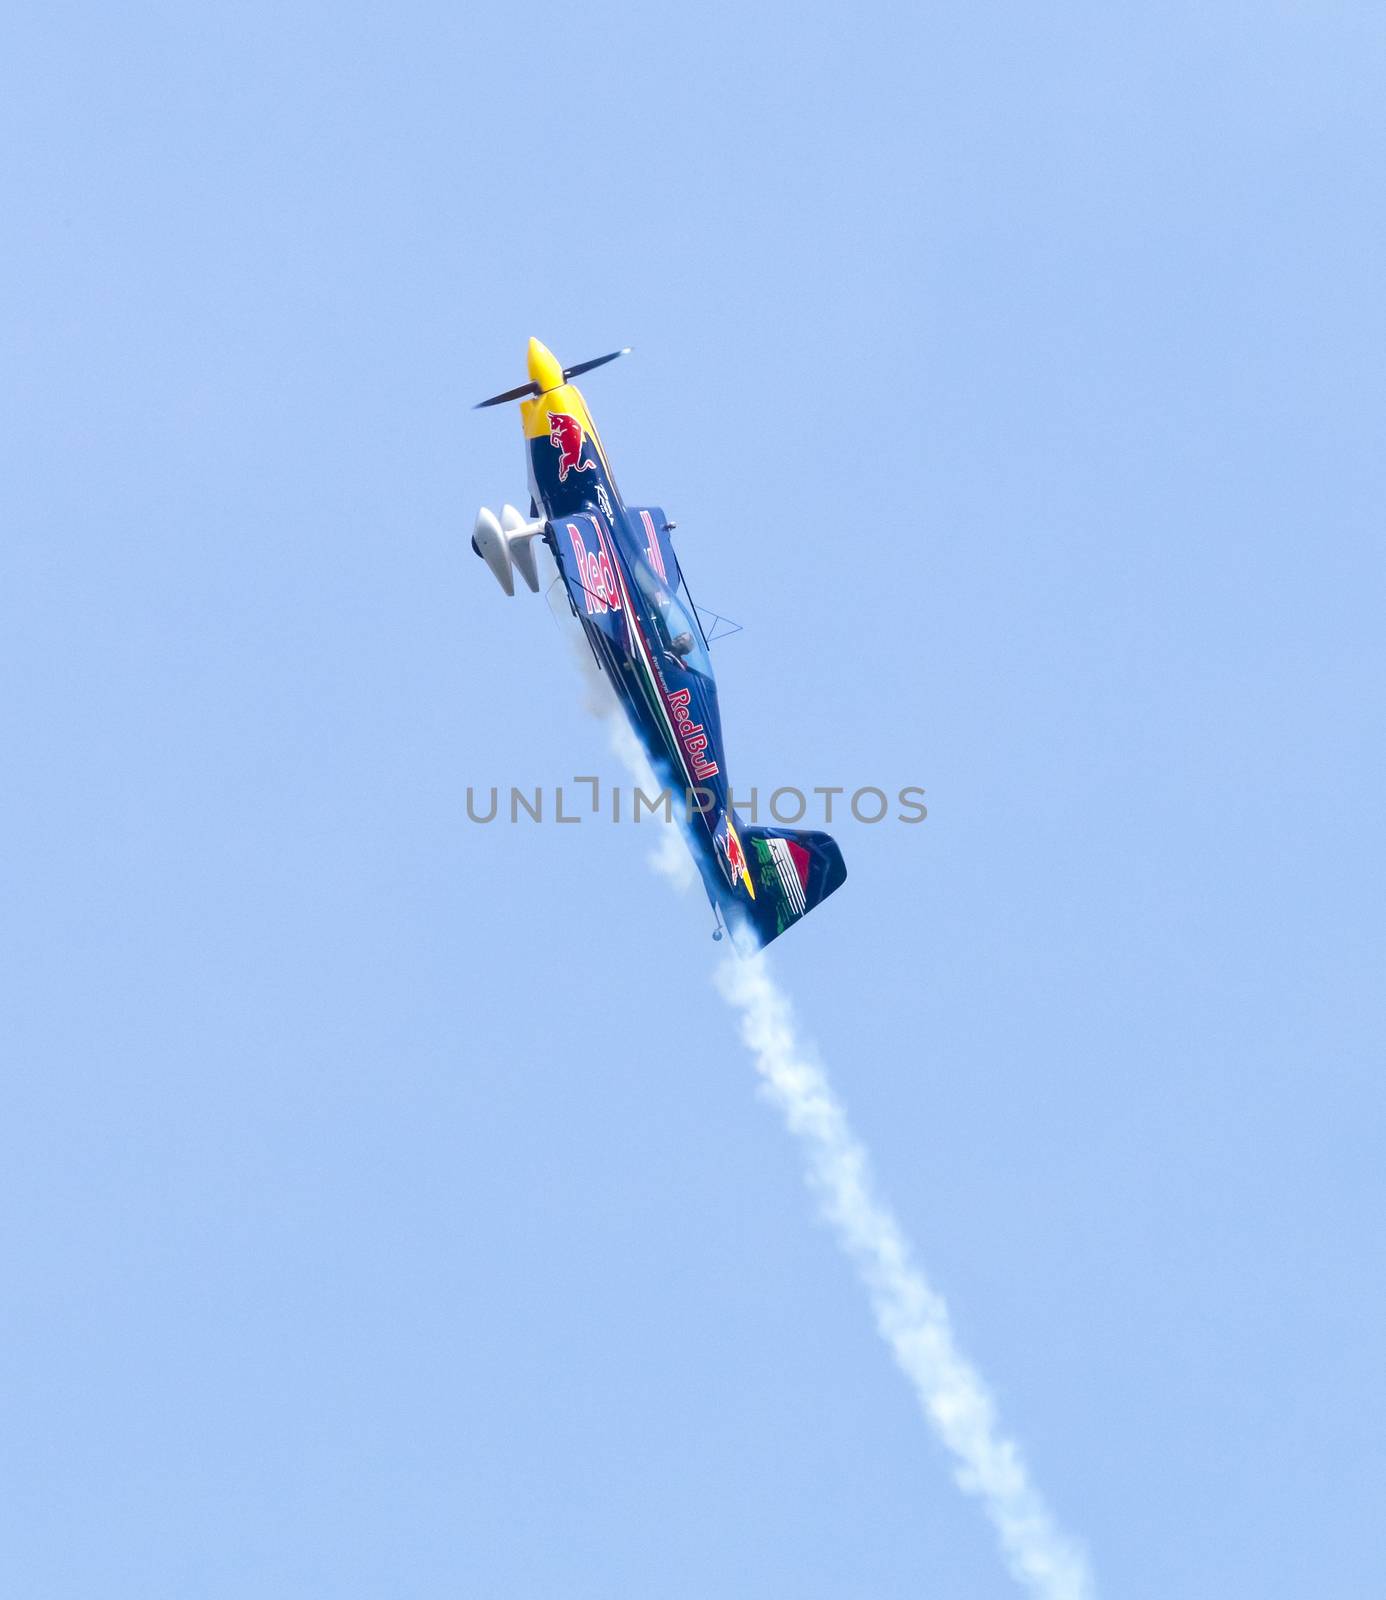 Plasy, Czech Republic - April 27, 2013: Peter Besenyei from Hungary on the Airshow "The Day on Air". His aircraft is painted in the colors of Red Bull energy drink for sponsorship reasons